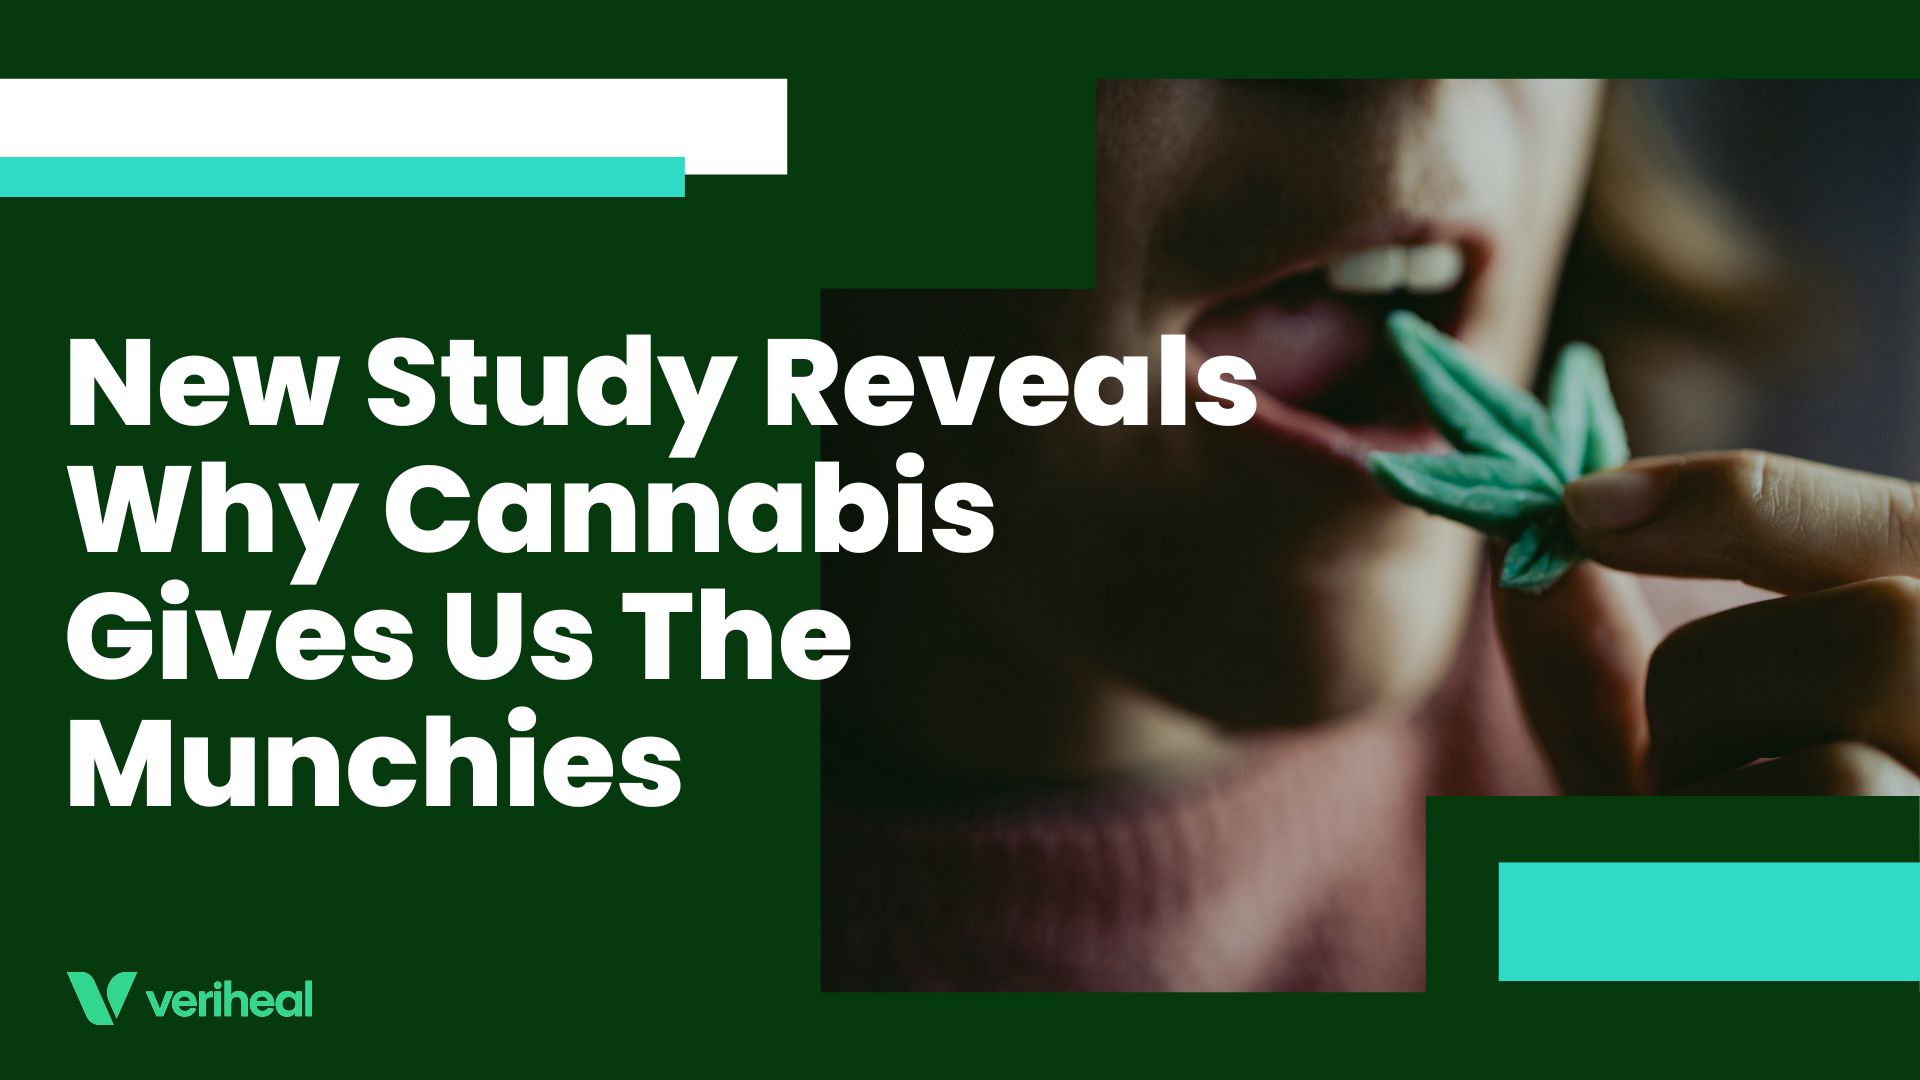 New Study Reveals Why Cannabis Gives Us The Munchies